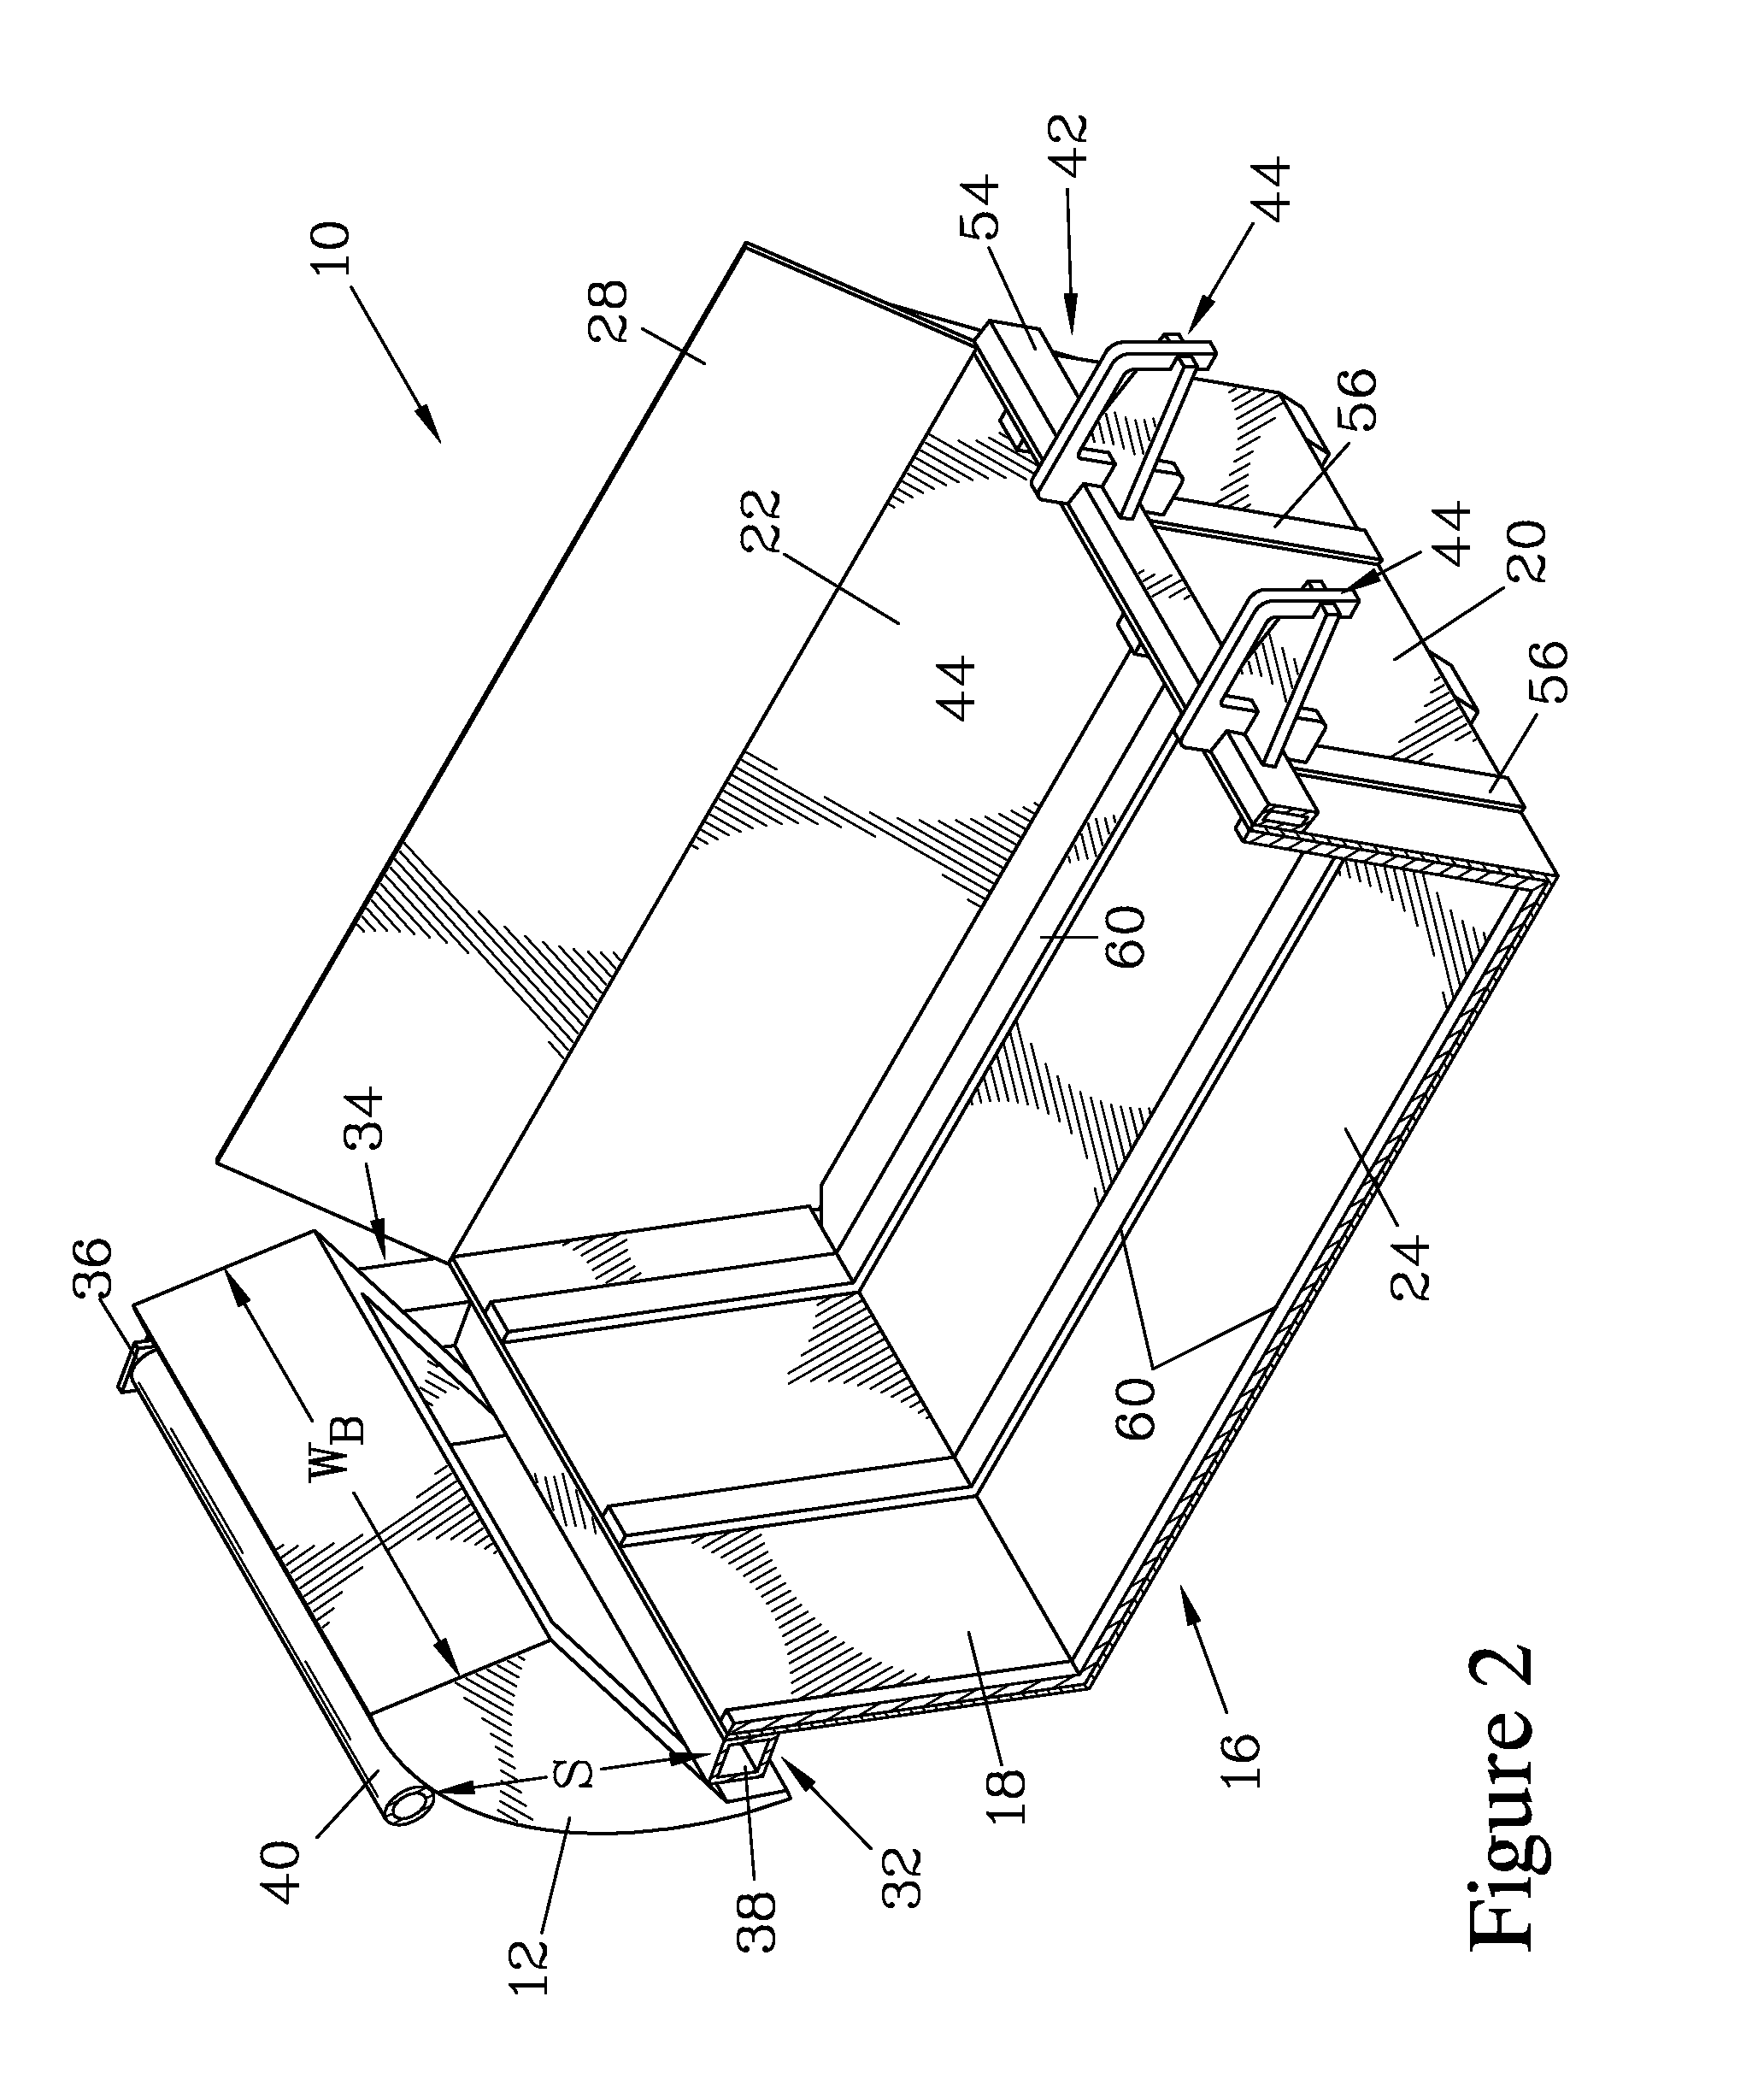 Bedding box for use with compact excavator